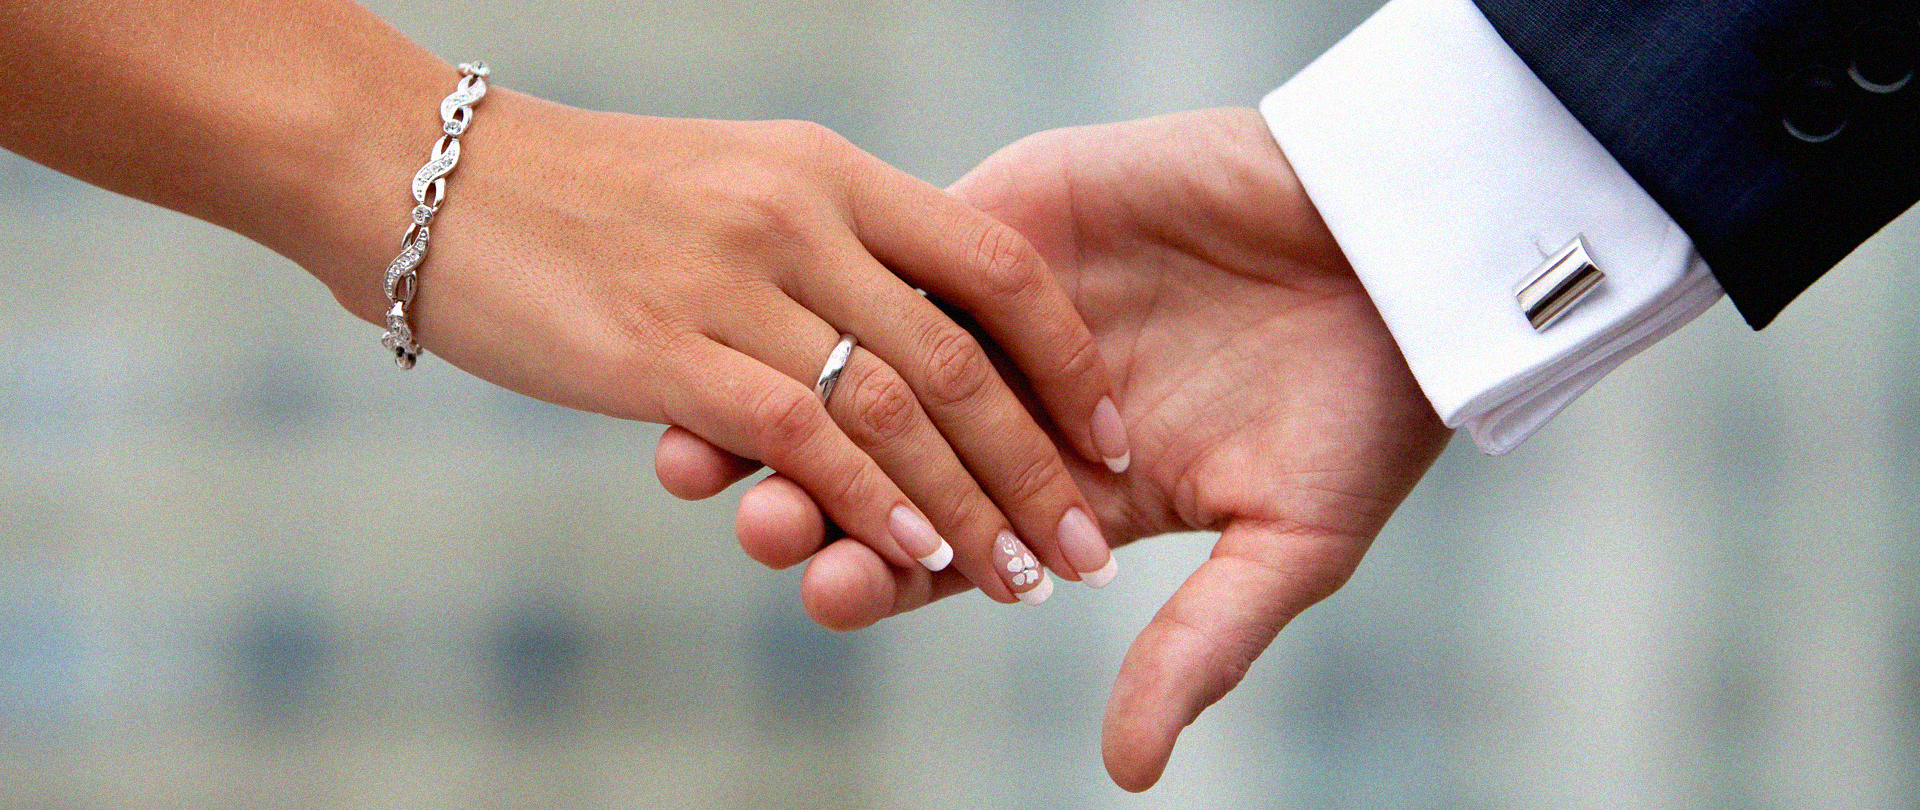 Journey of Two - Marriage Ceremonies
Sunday, June 25, 12:30 PM
